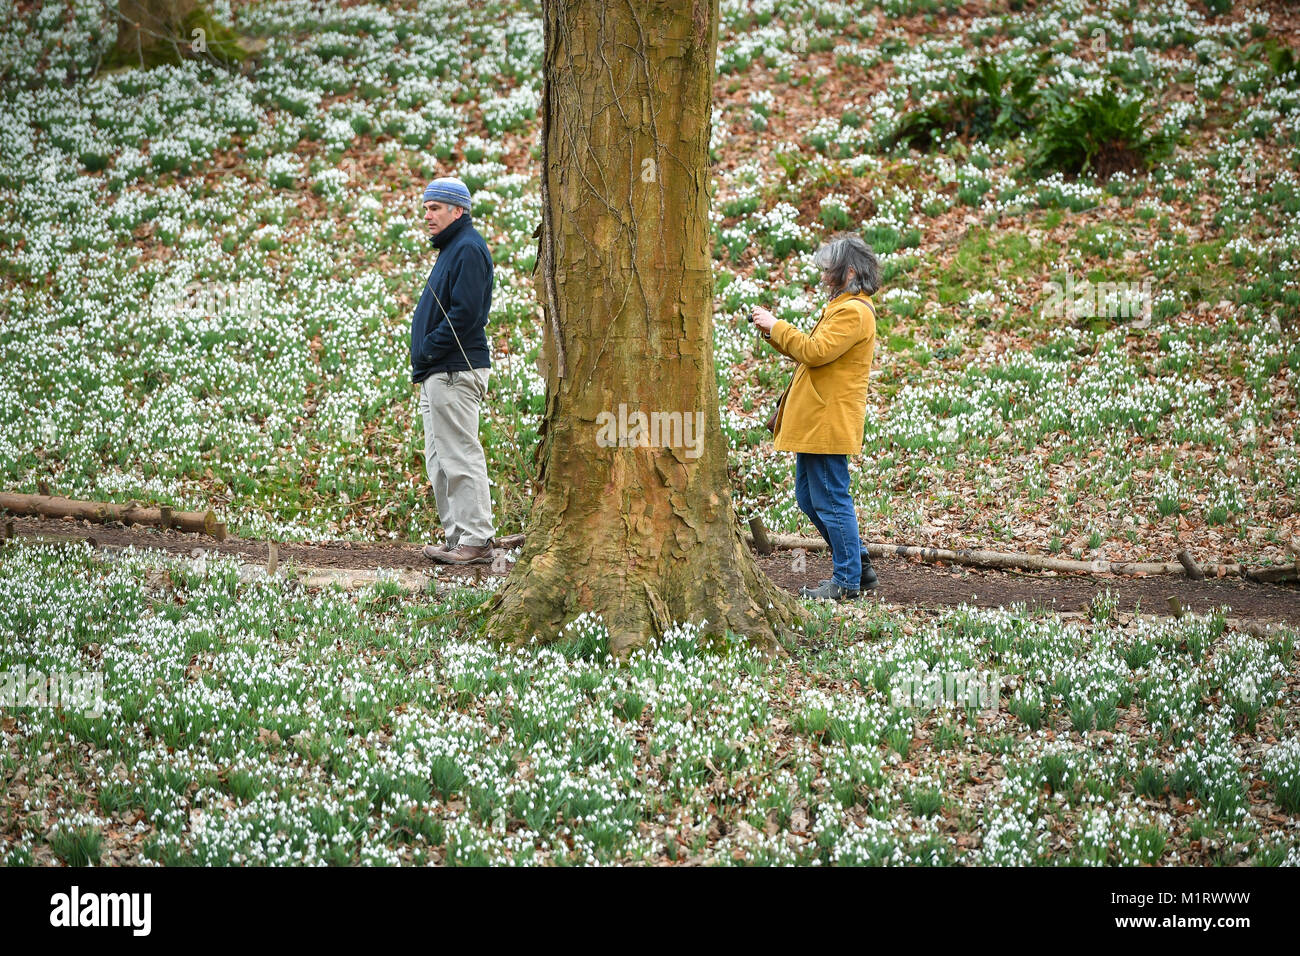 People walk through snowdrops at Rococo Garden in Painswick, Gloucestershire, where the traditional winter flowers are in full bloom. Stock Photo